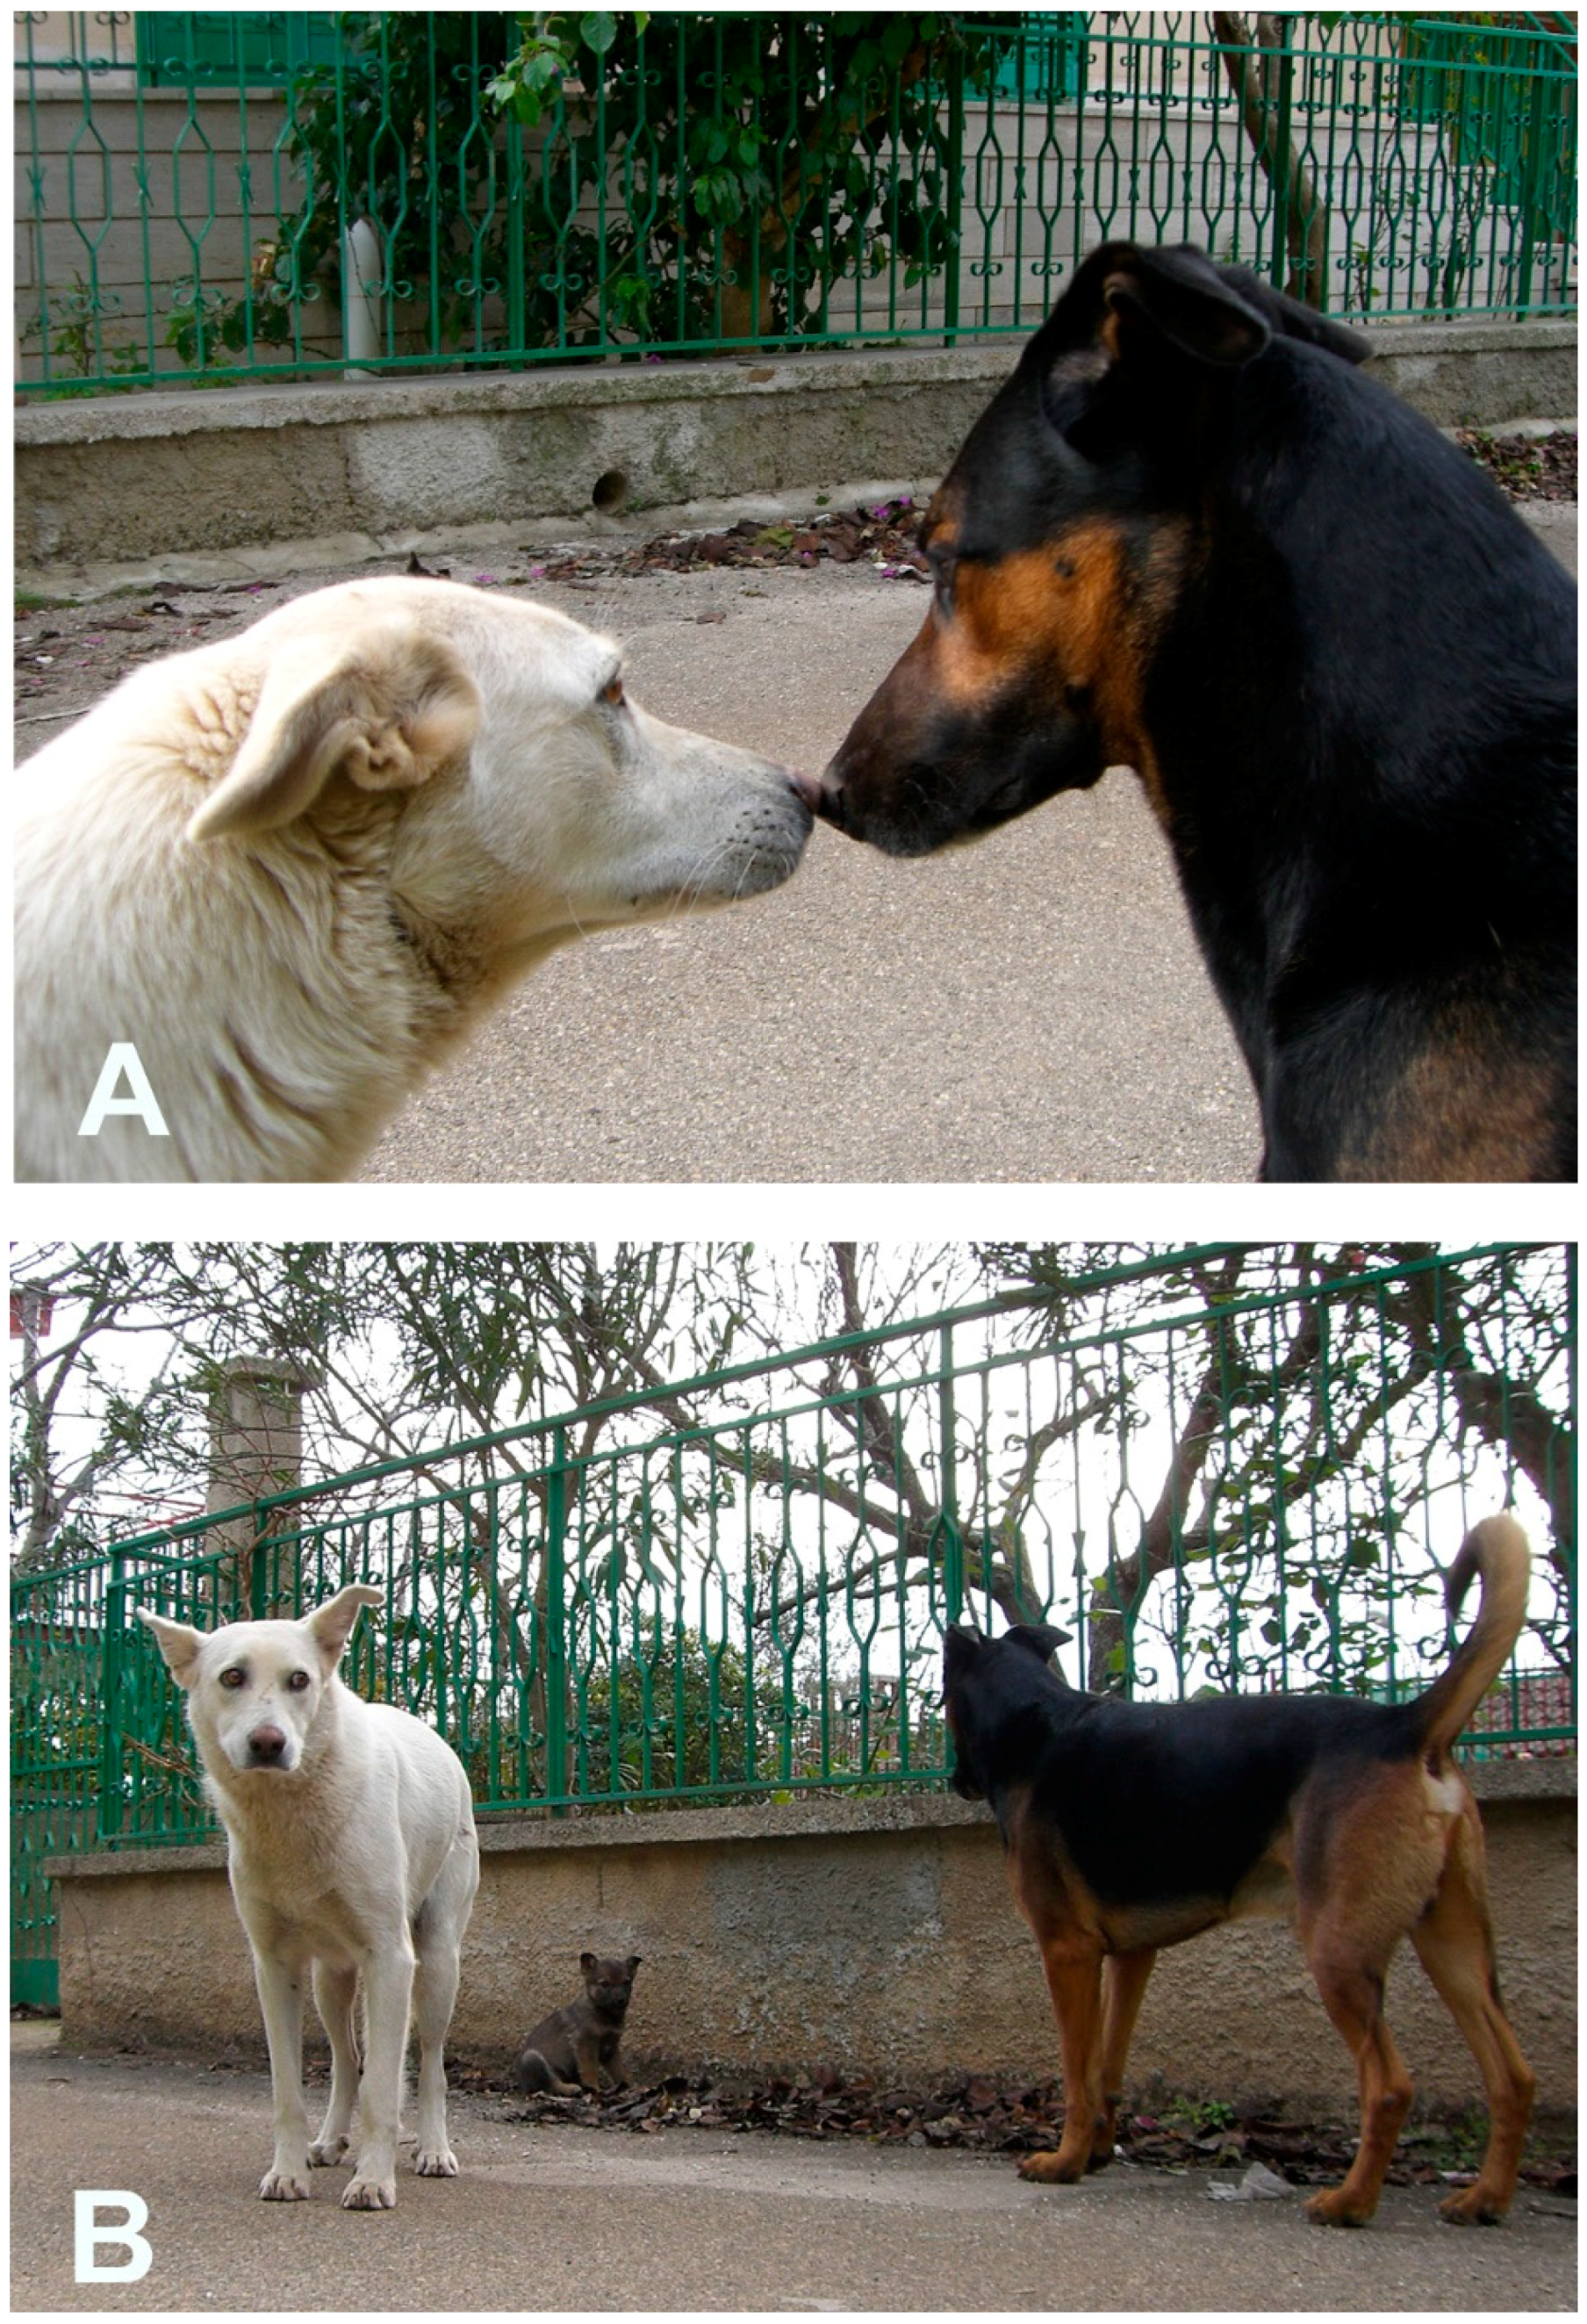 Animals | Free Full-Text | Communication in Dogs